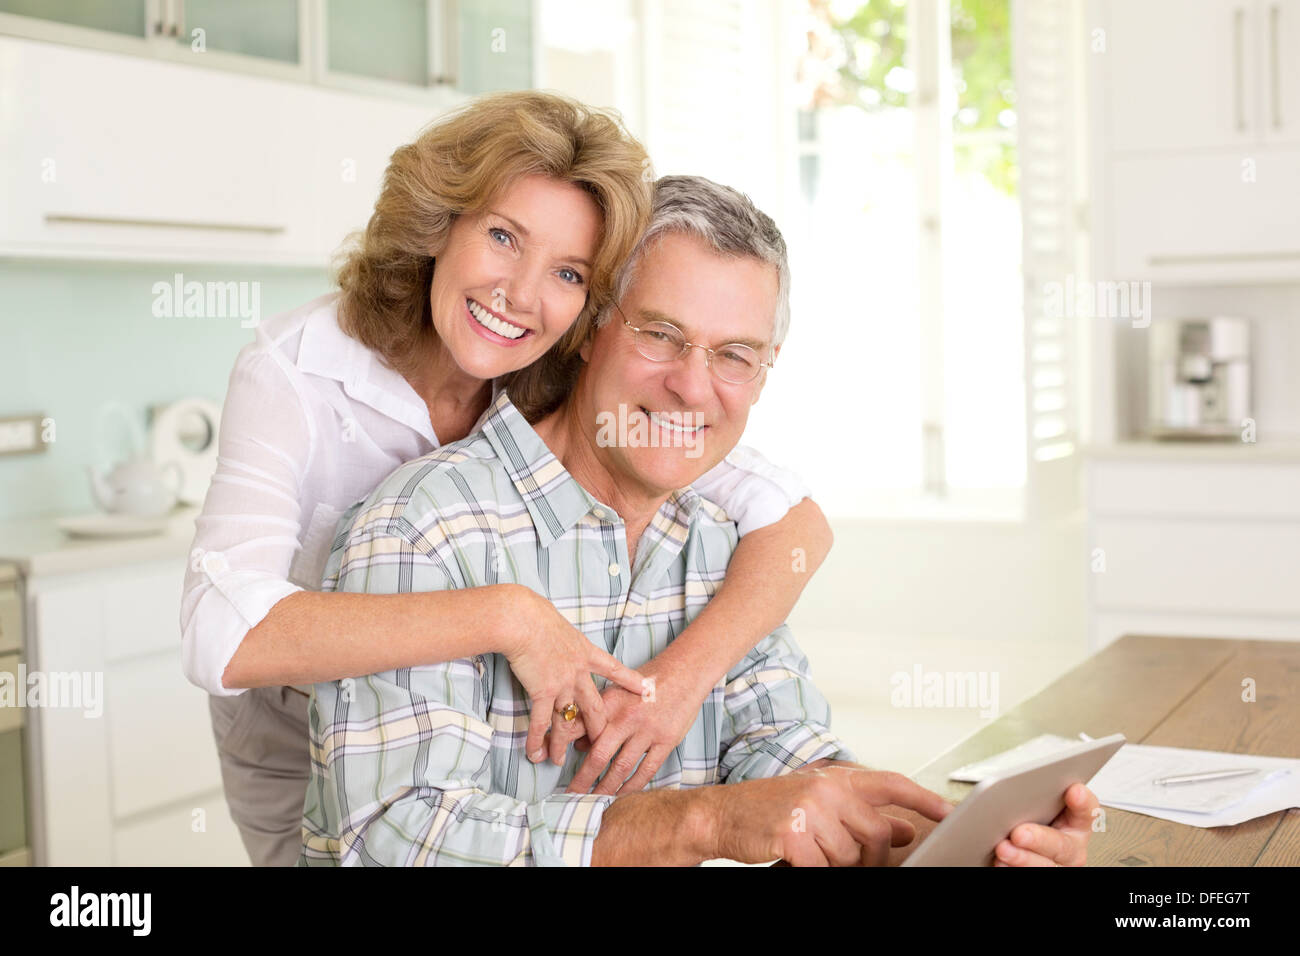 Portrait of smiling senior couple with digital tablet in kitchen Stock Photo